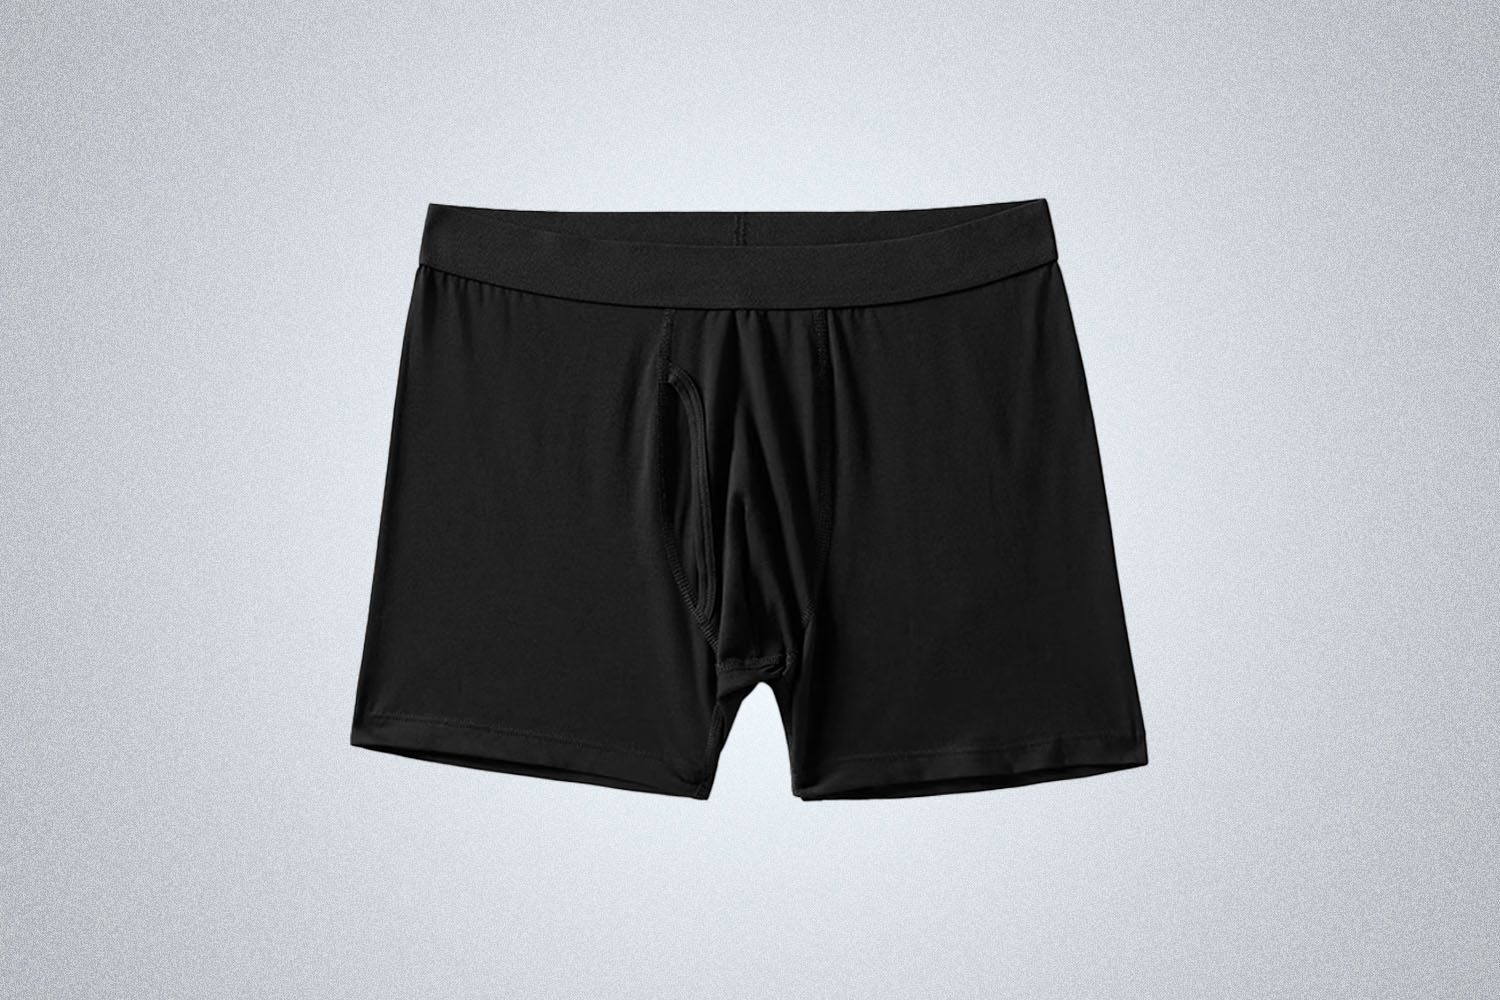 a pair of black Everlane briefs on a grey background